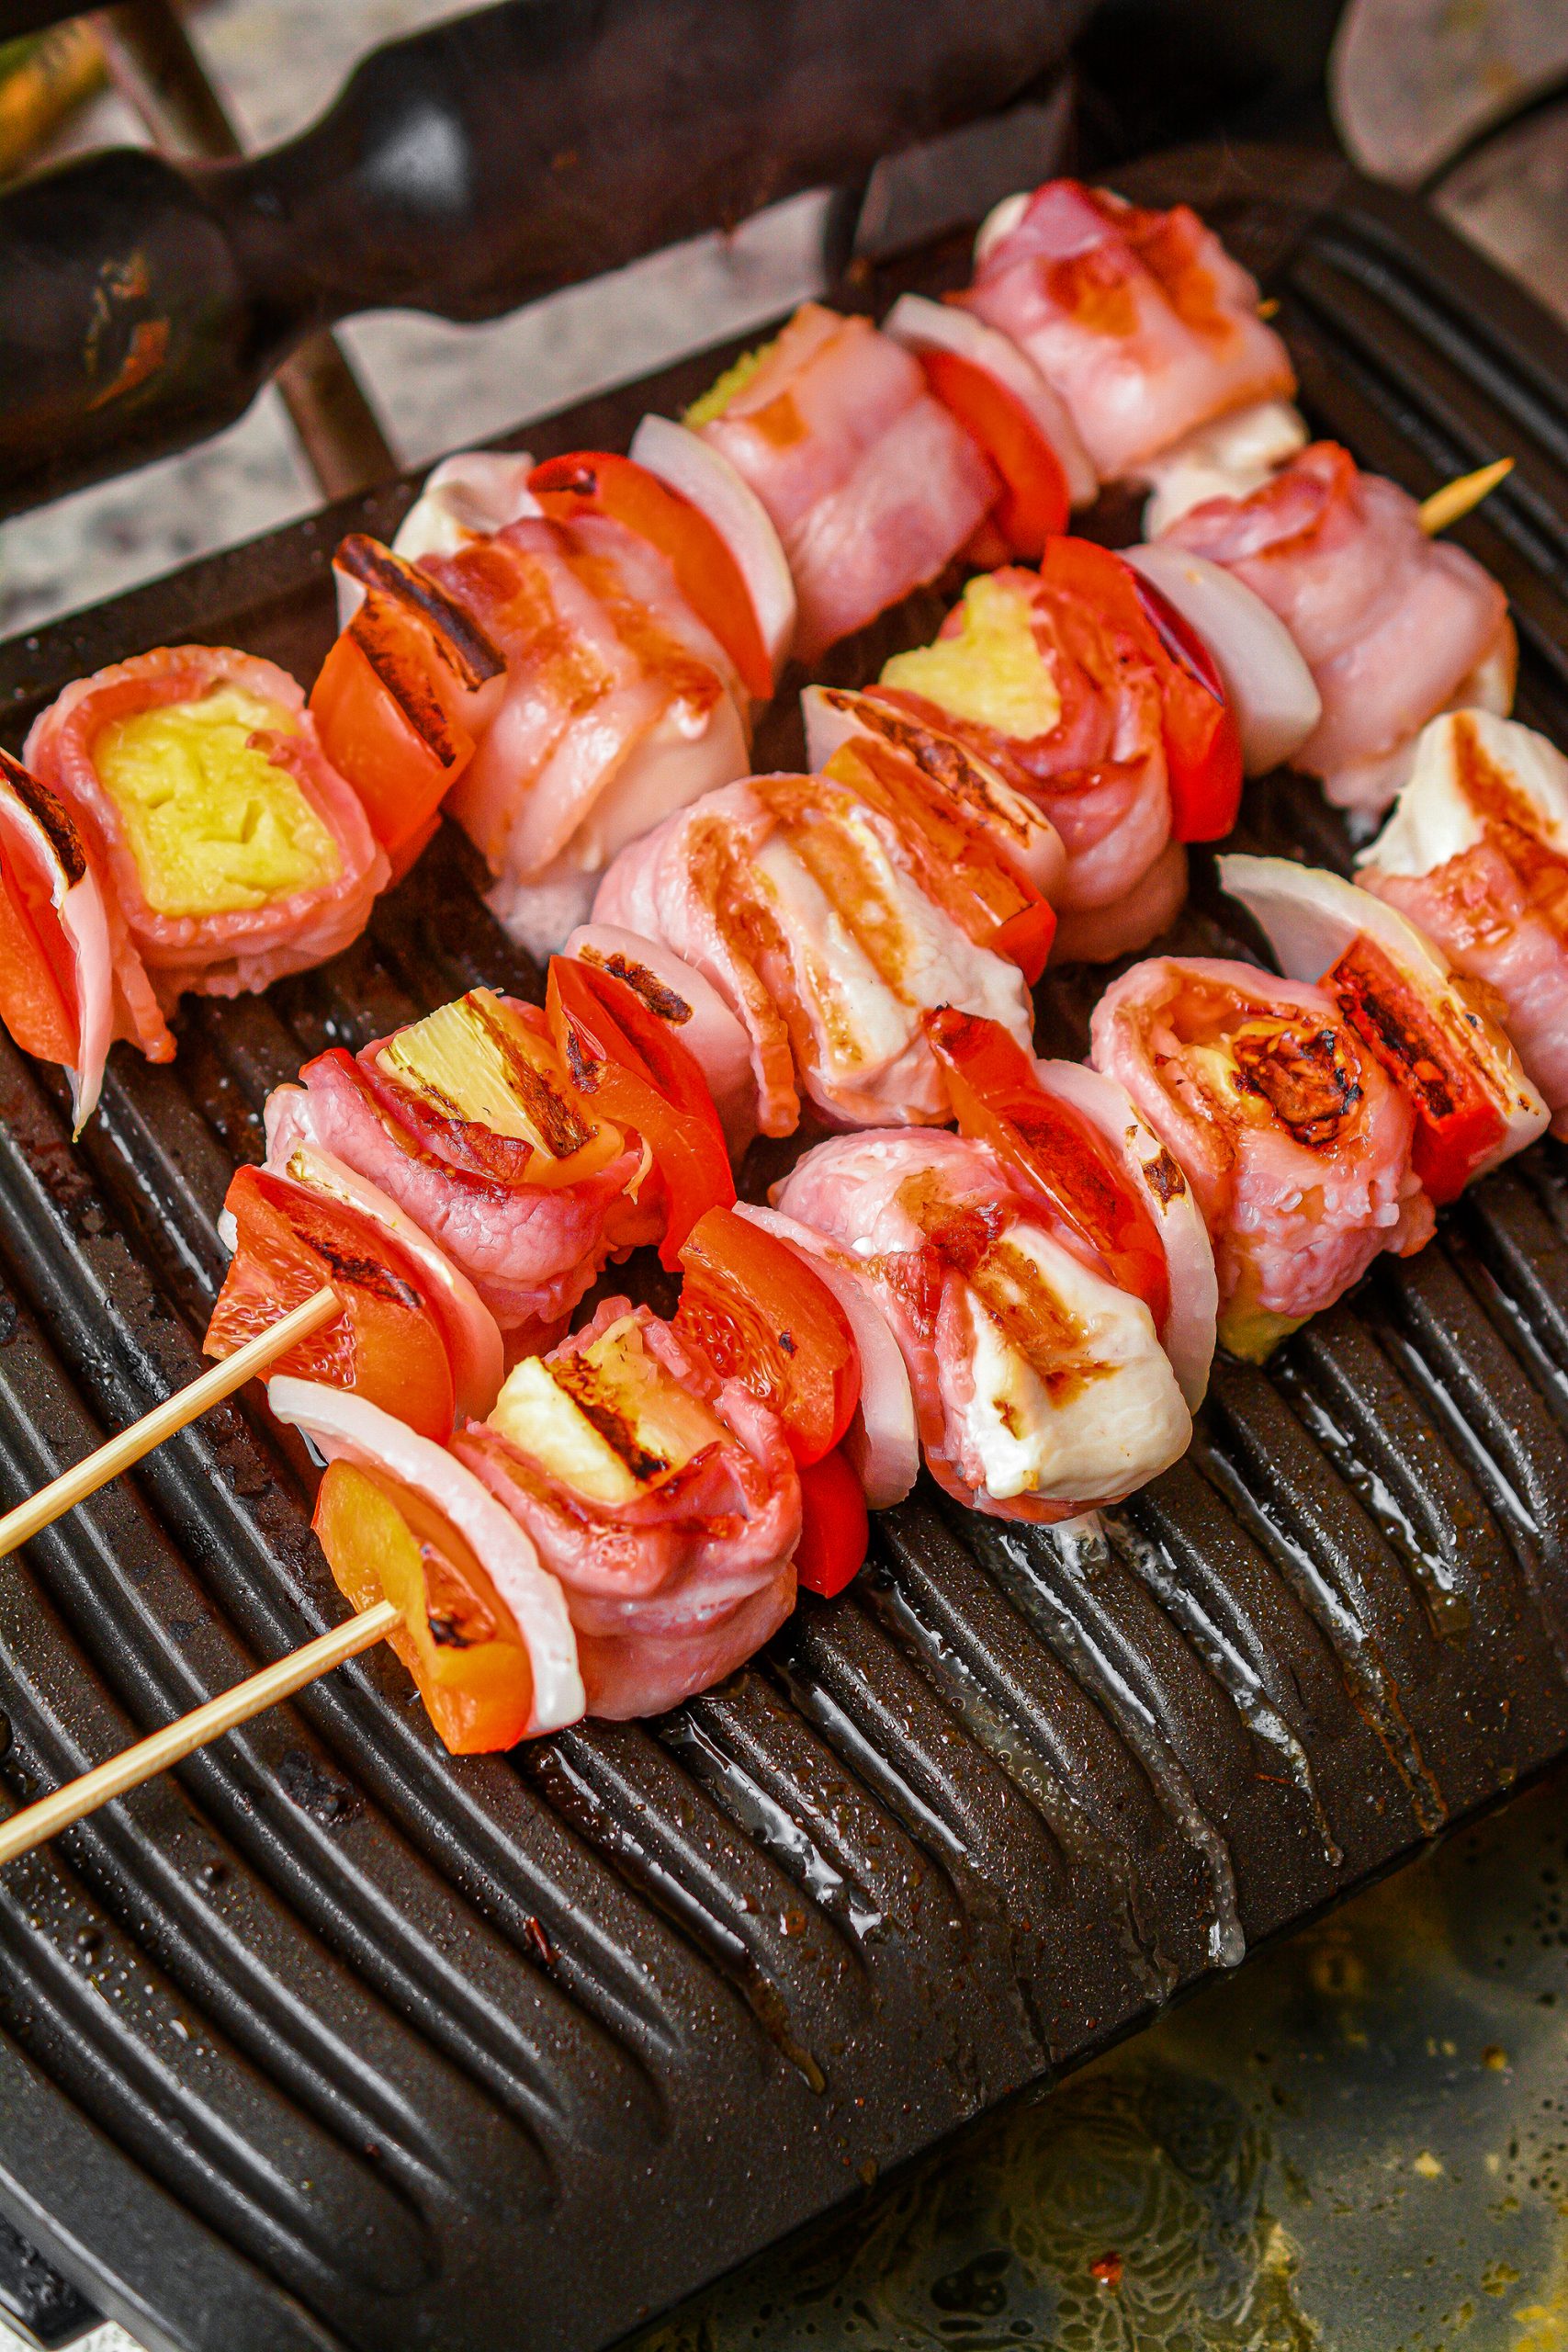 Place the skewers on the grill, and cook for 5-6 minutes per side.